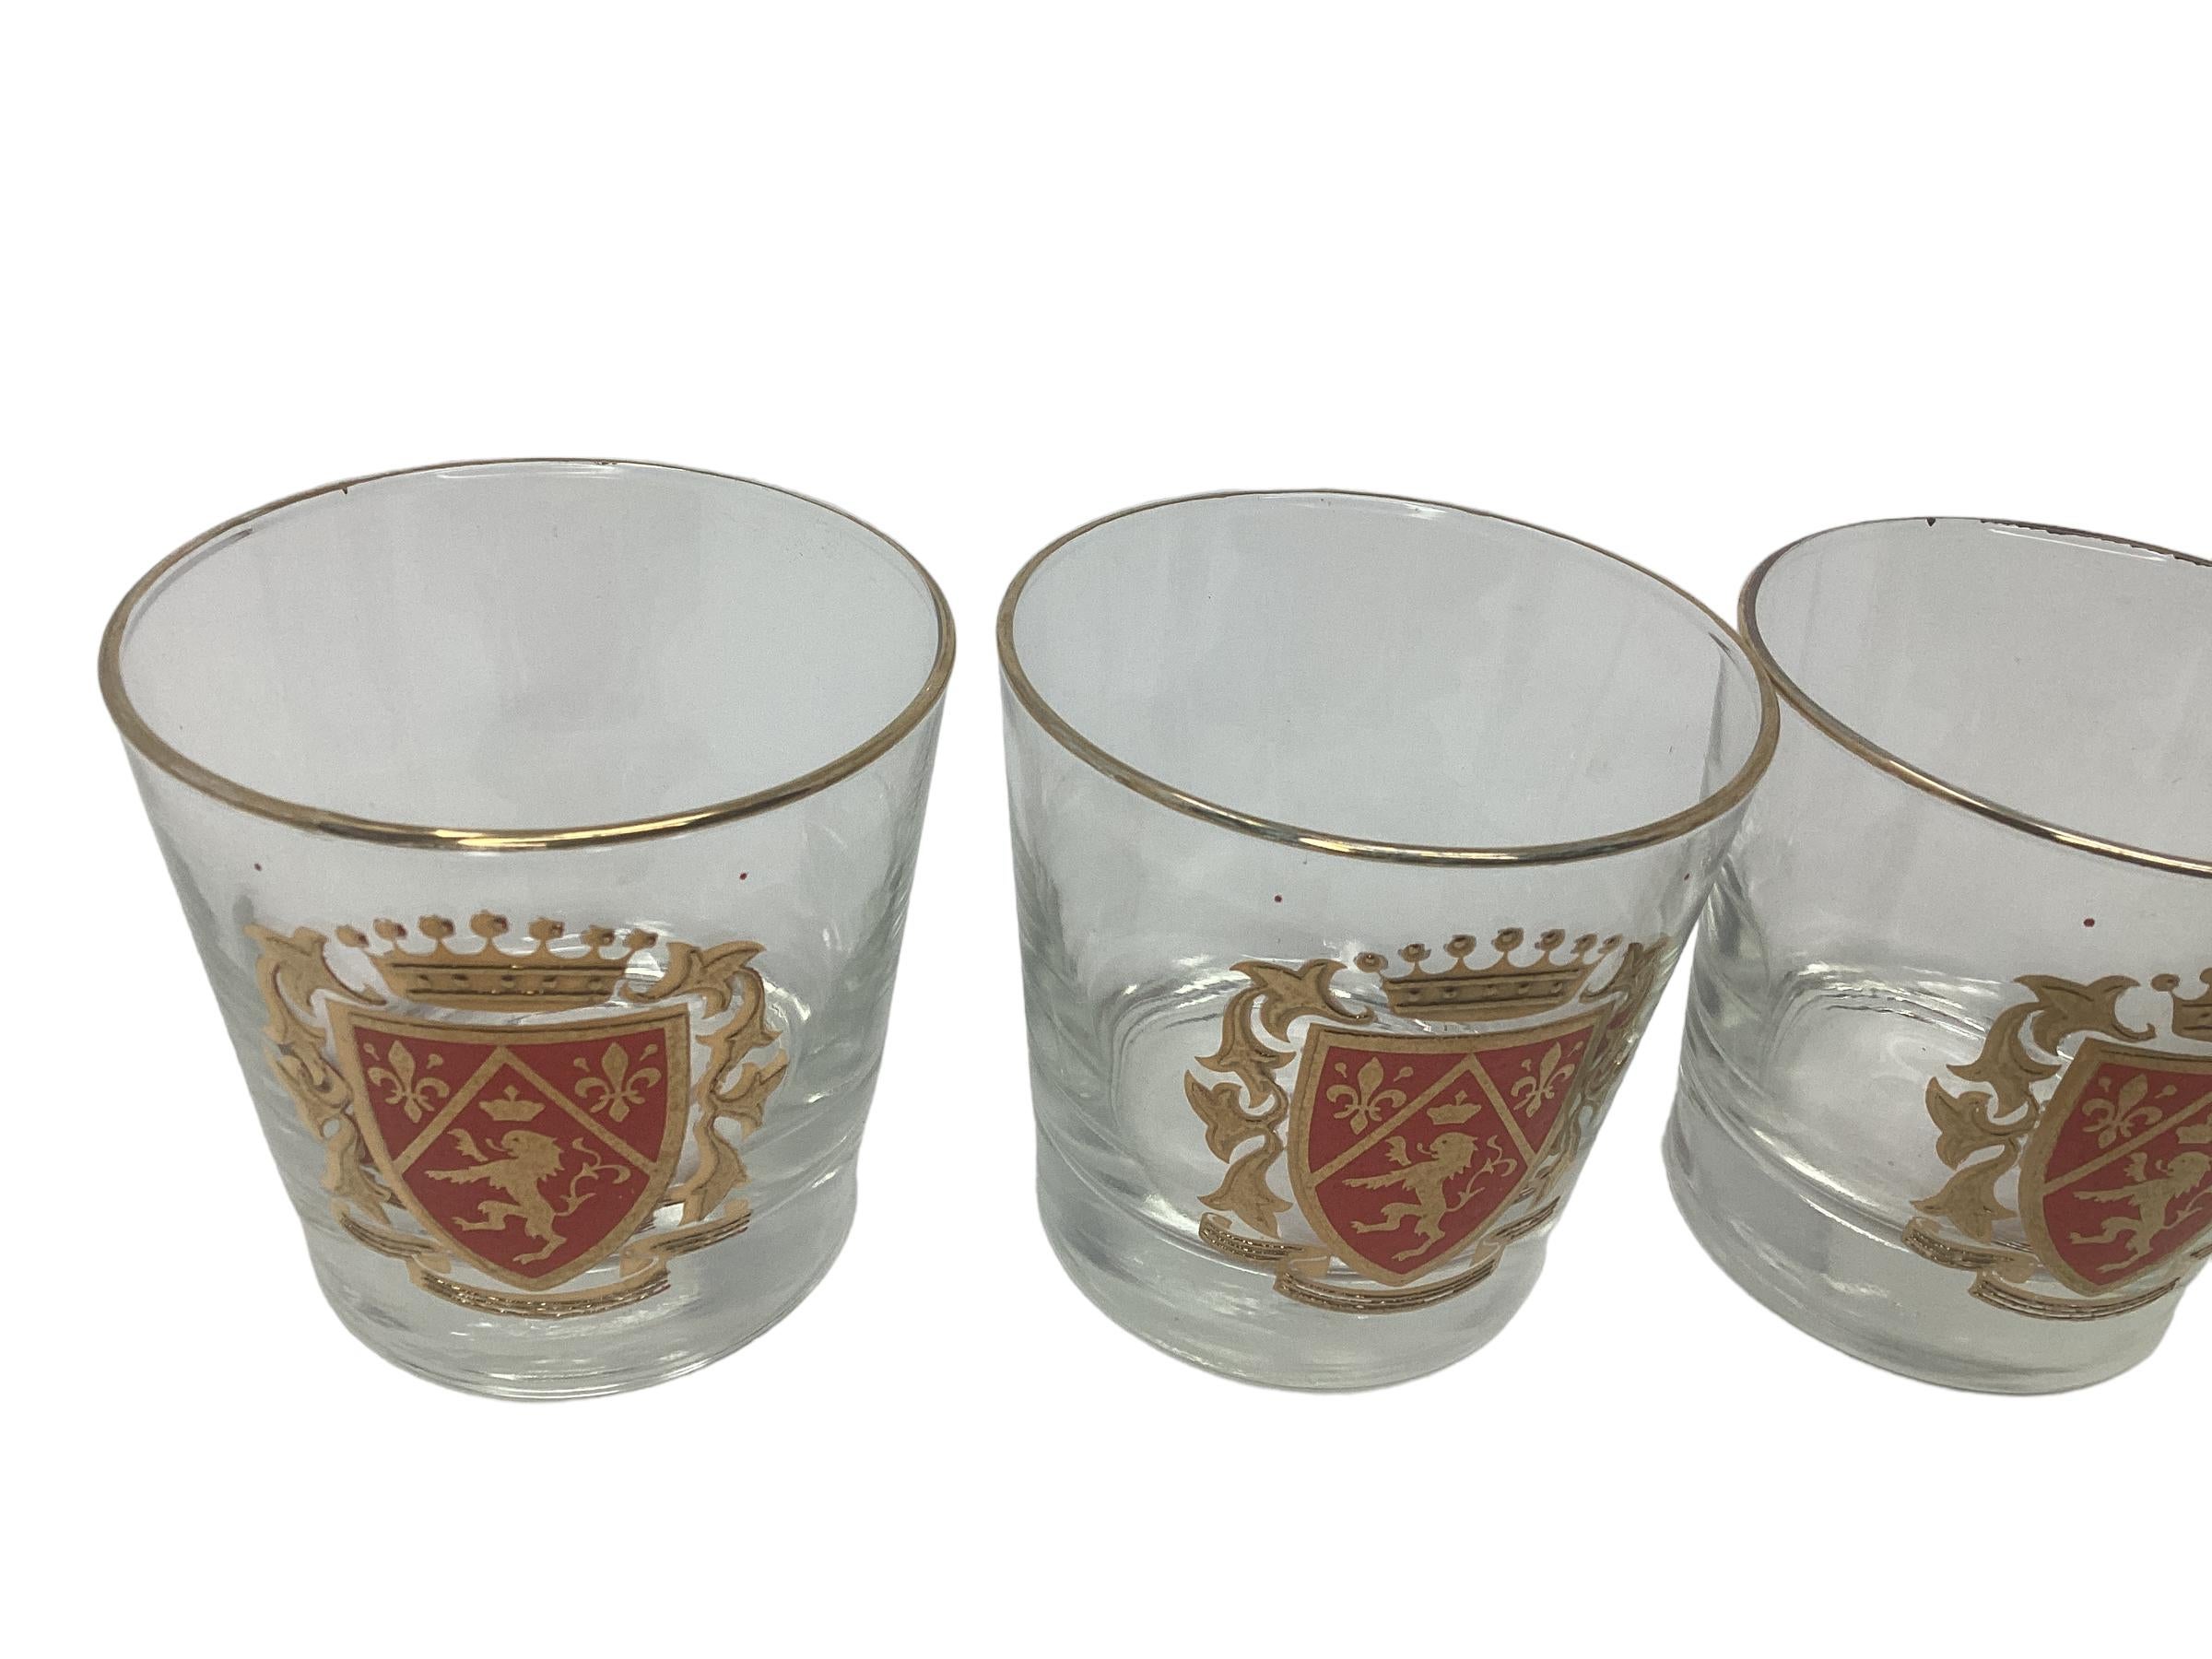 Set of 4 Vintage Libbey Rocks Glasses with Rampant Lions. Each glass is rimmed in 22k gold with a bold red shield and a rampant lion and fleur de lis, topped with a gold crown.